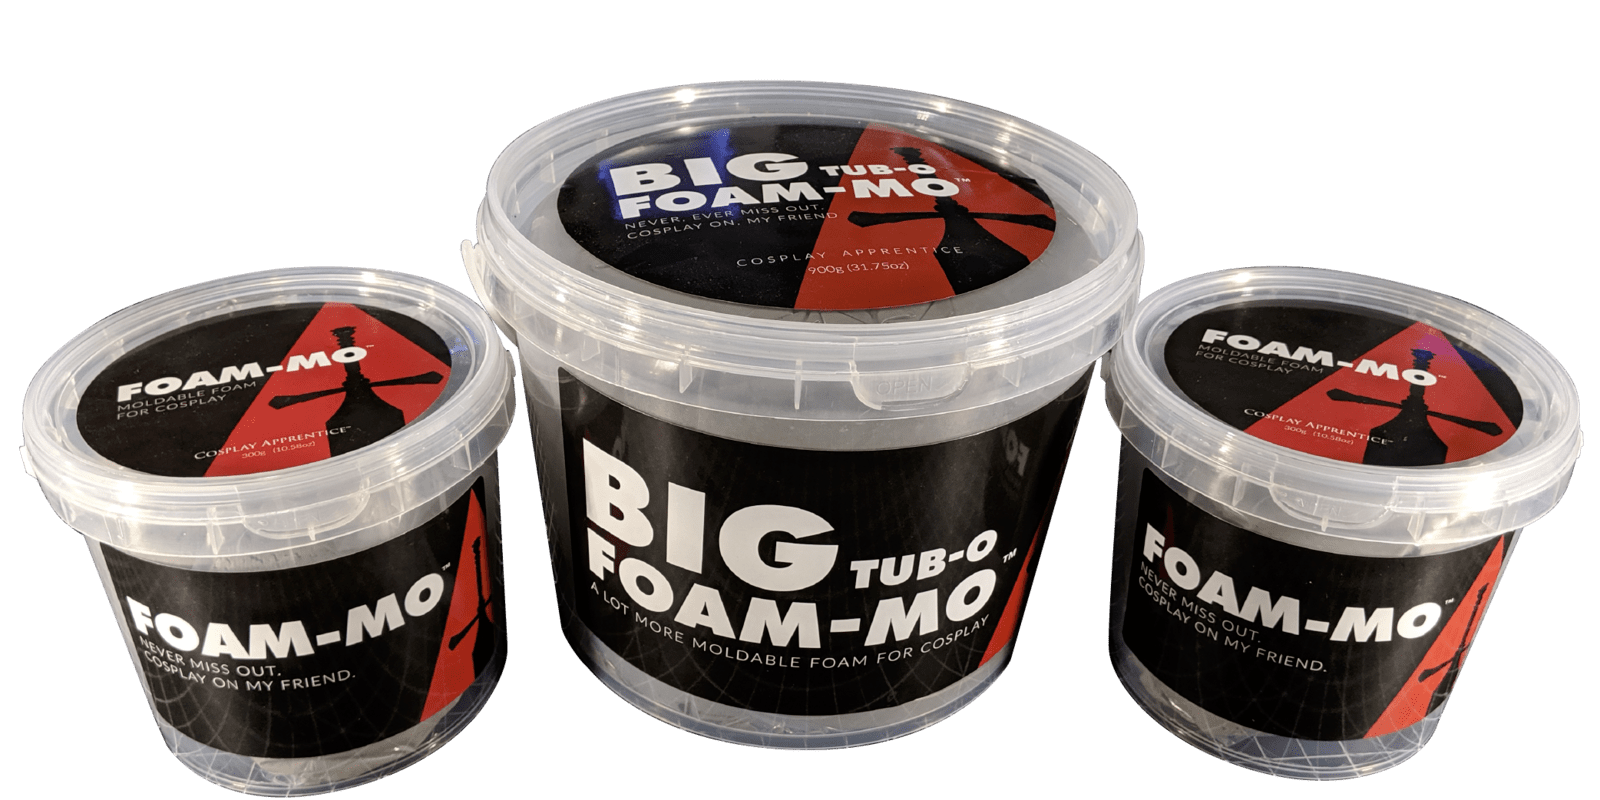 Foam-Mo Moldable Foam Clay for Cosplay